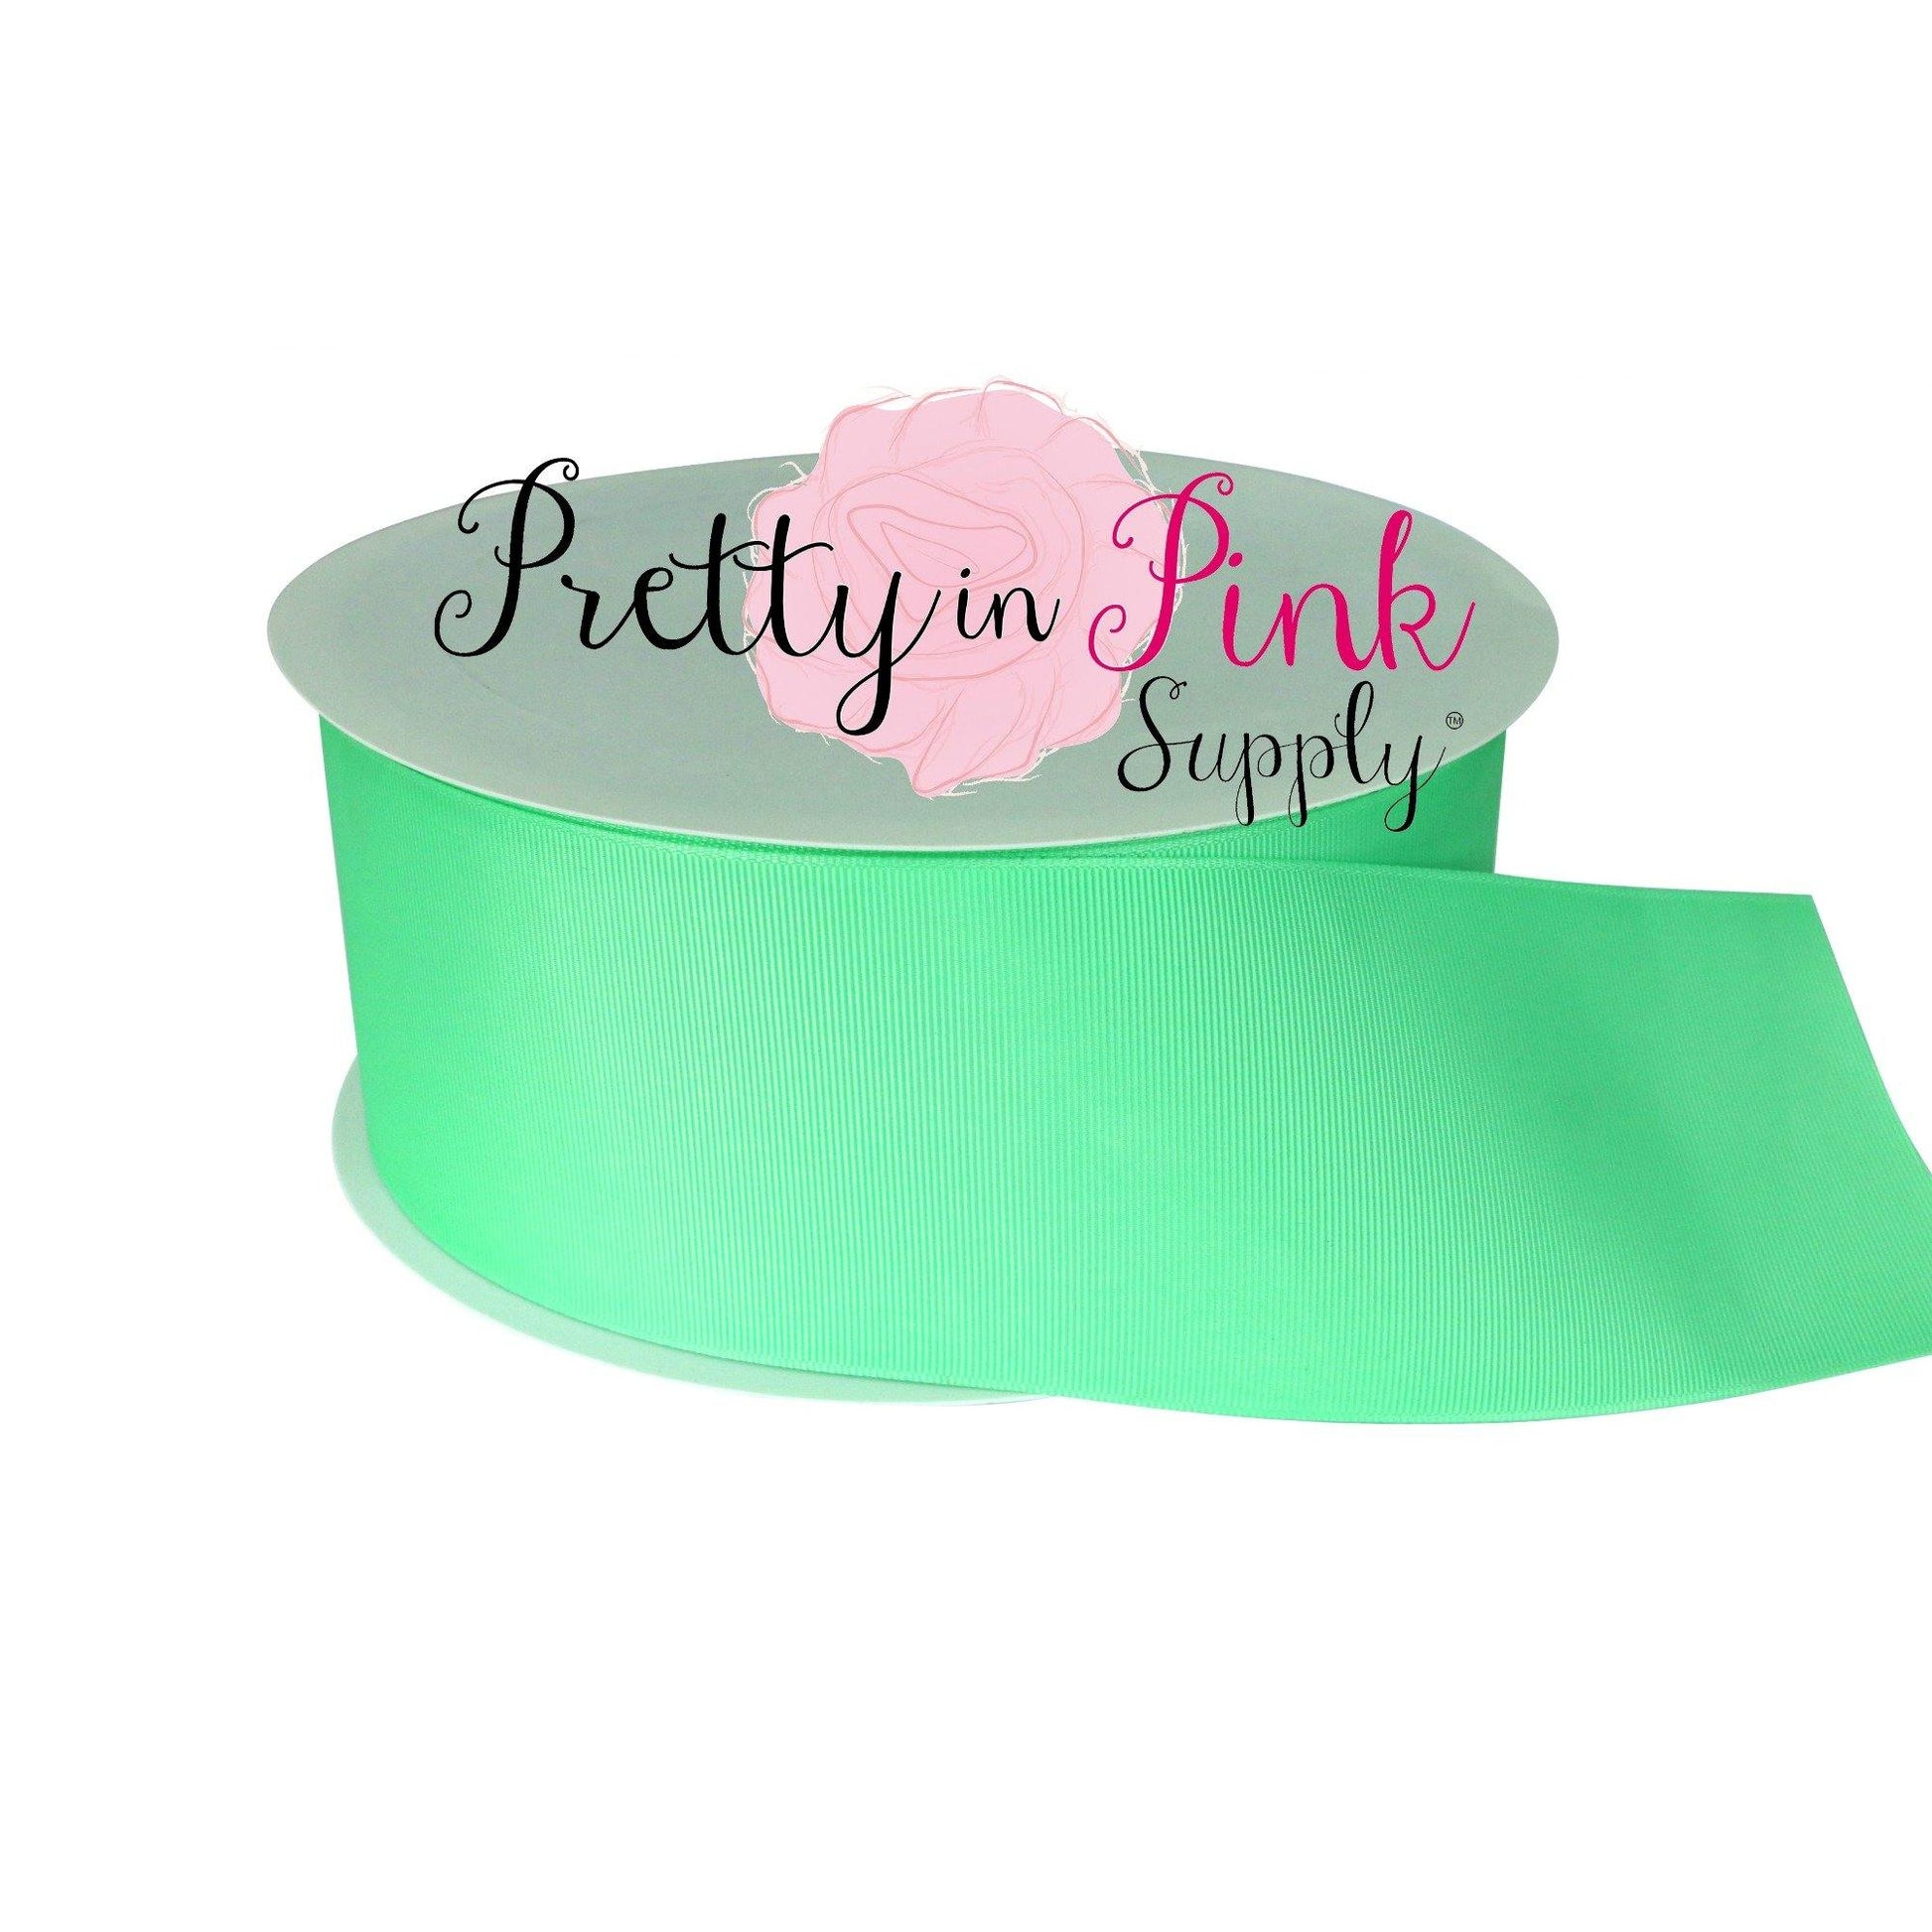 3" SOLID Mint Grosgrain RIBBON - Pretty in Pink Supply